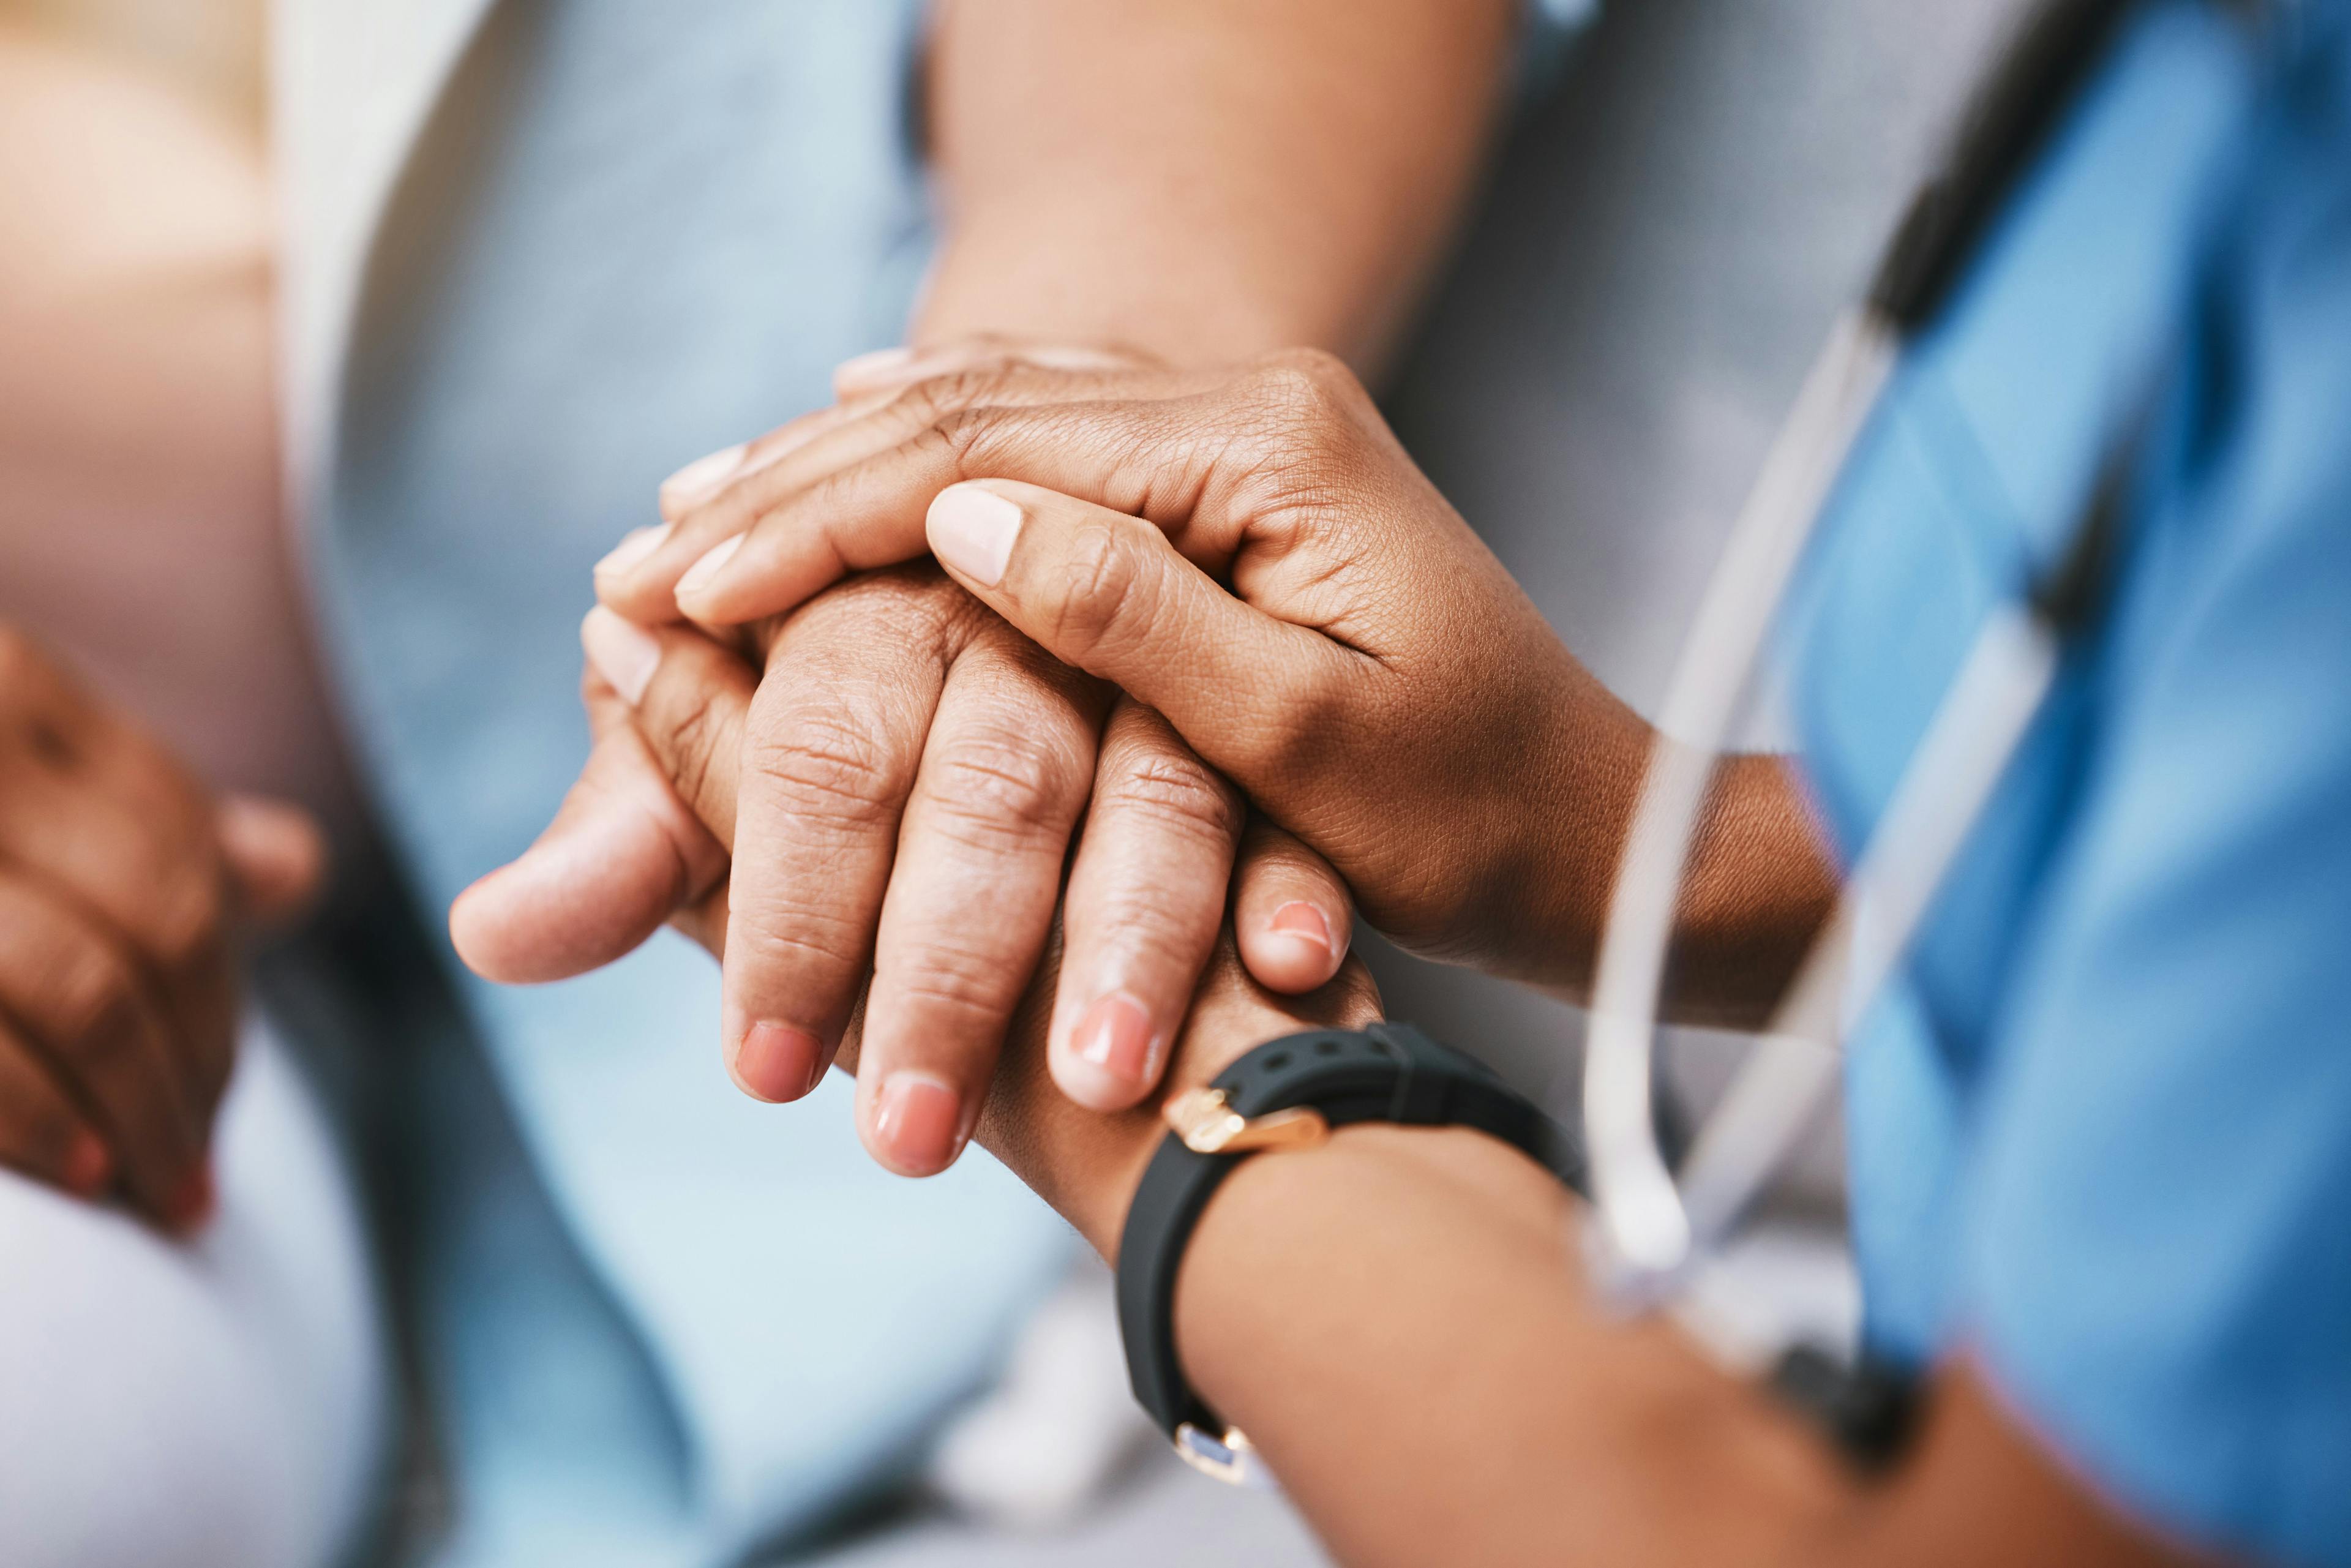 Physician holds hand of patient | C Davids/peopleimages.com - stock.adobe.com